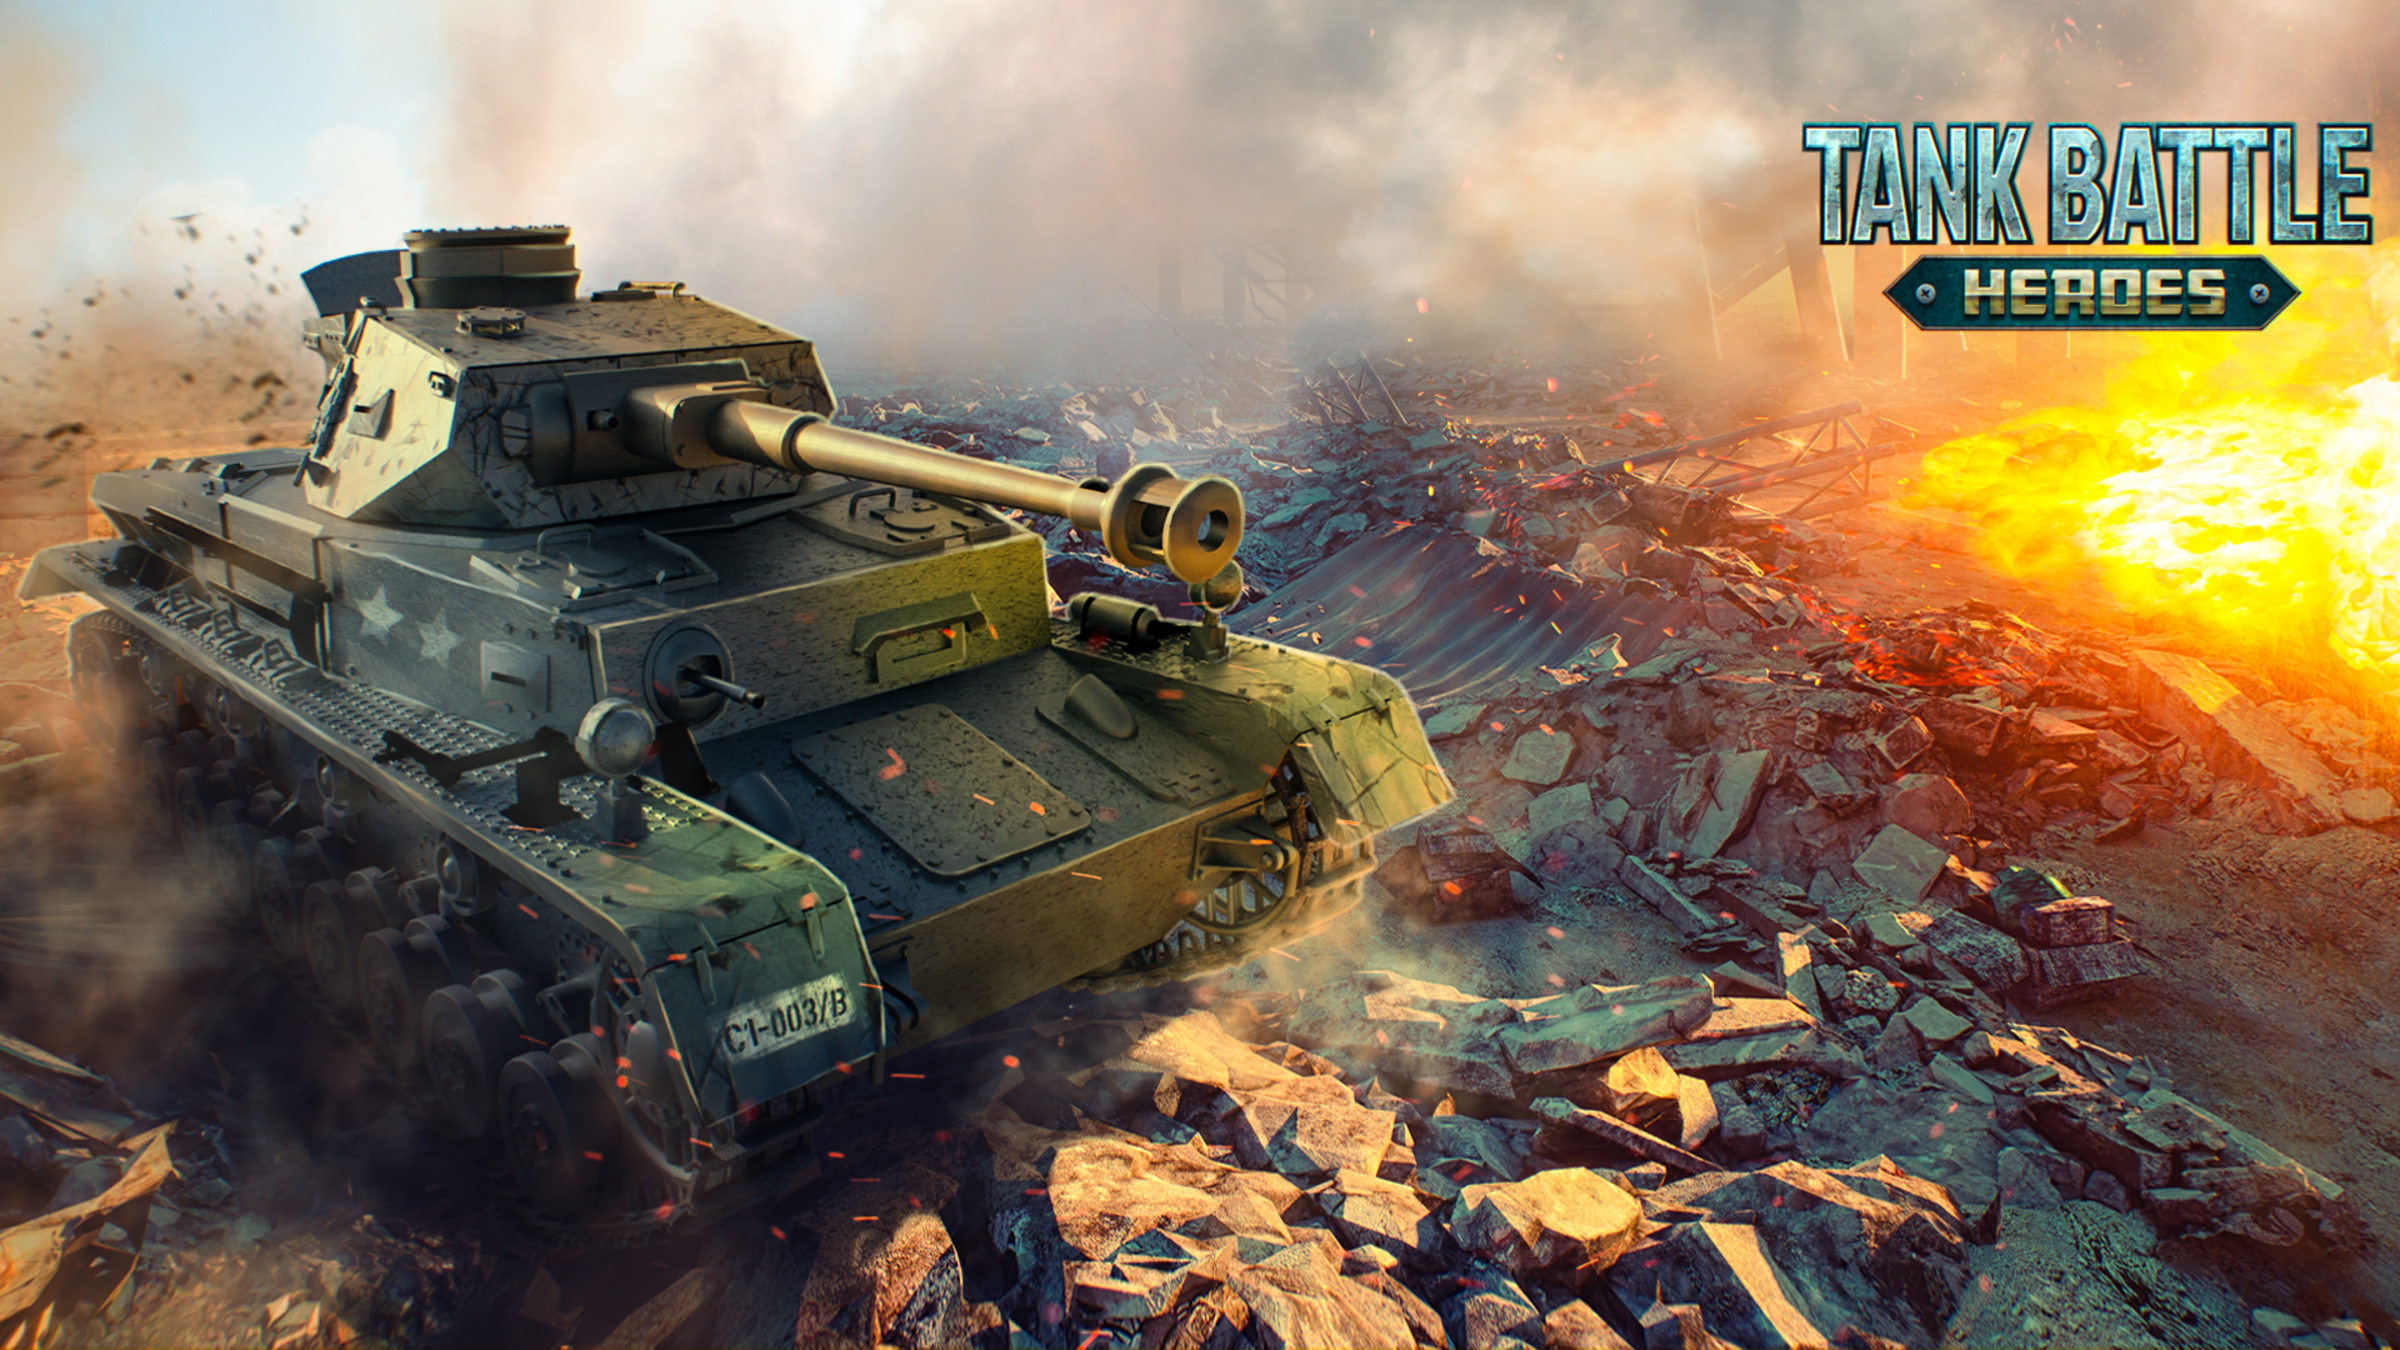 Battle Tank. Tanks in the City game. Герой битвы танки